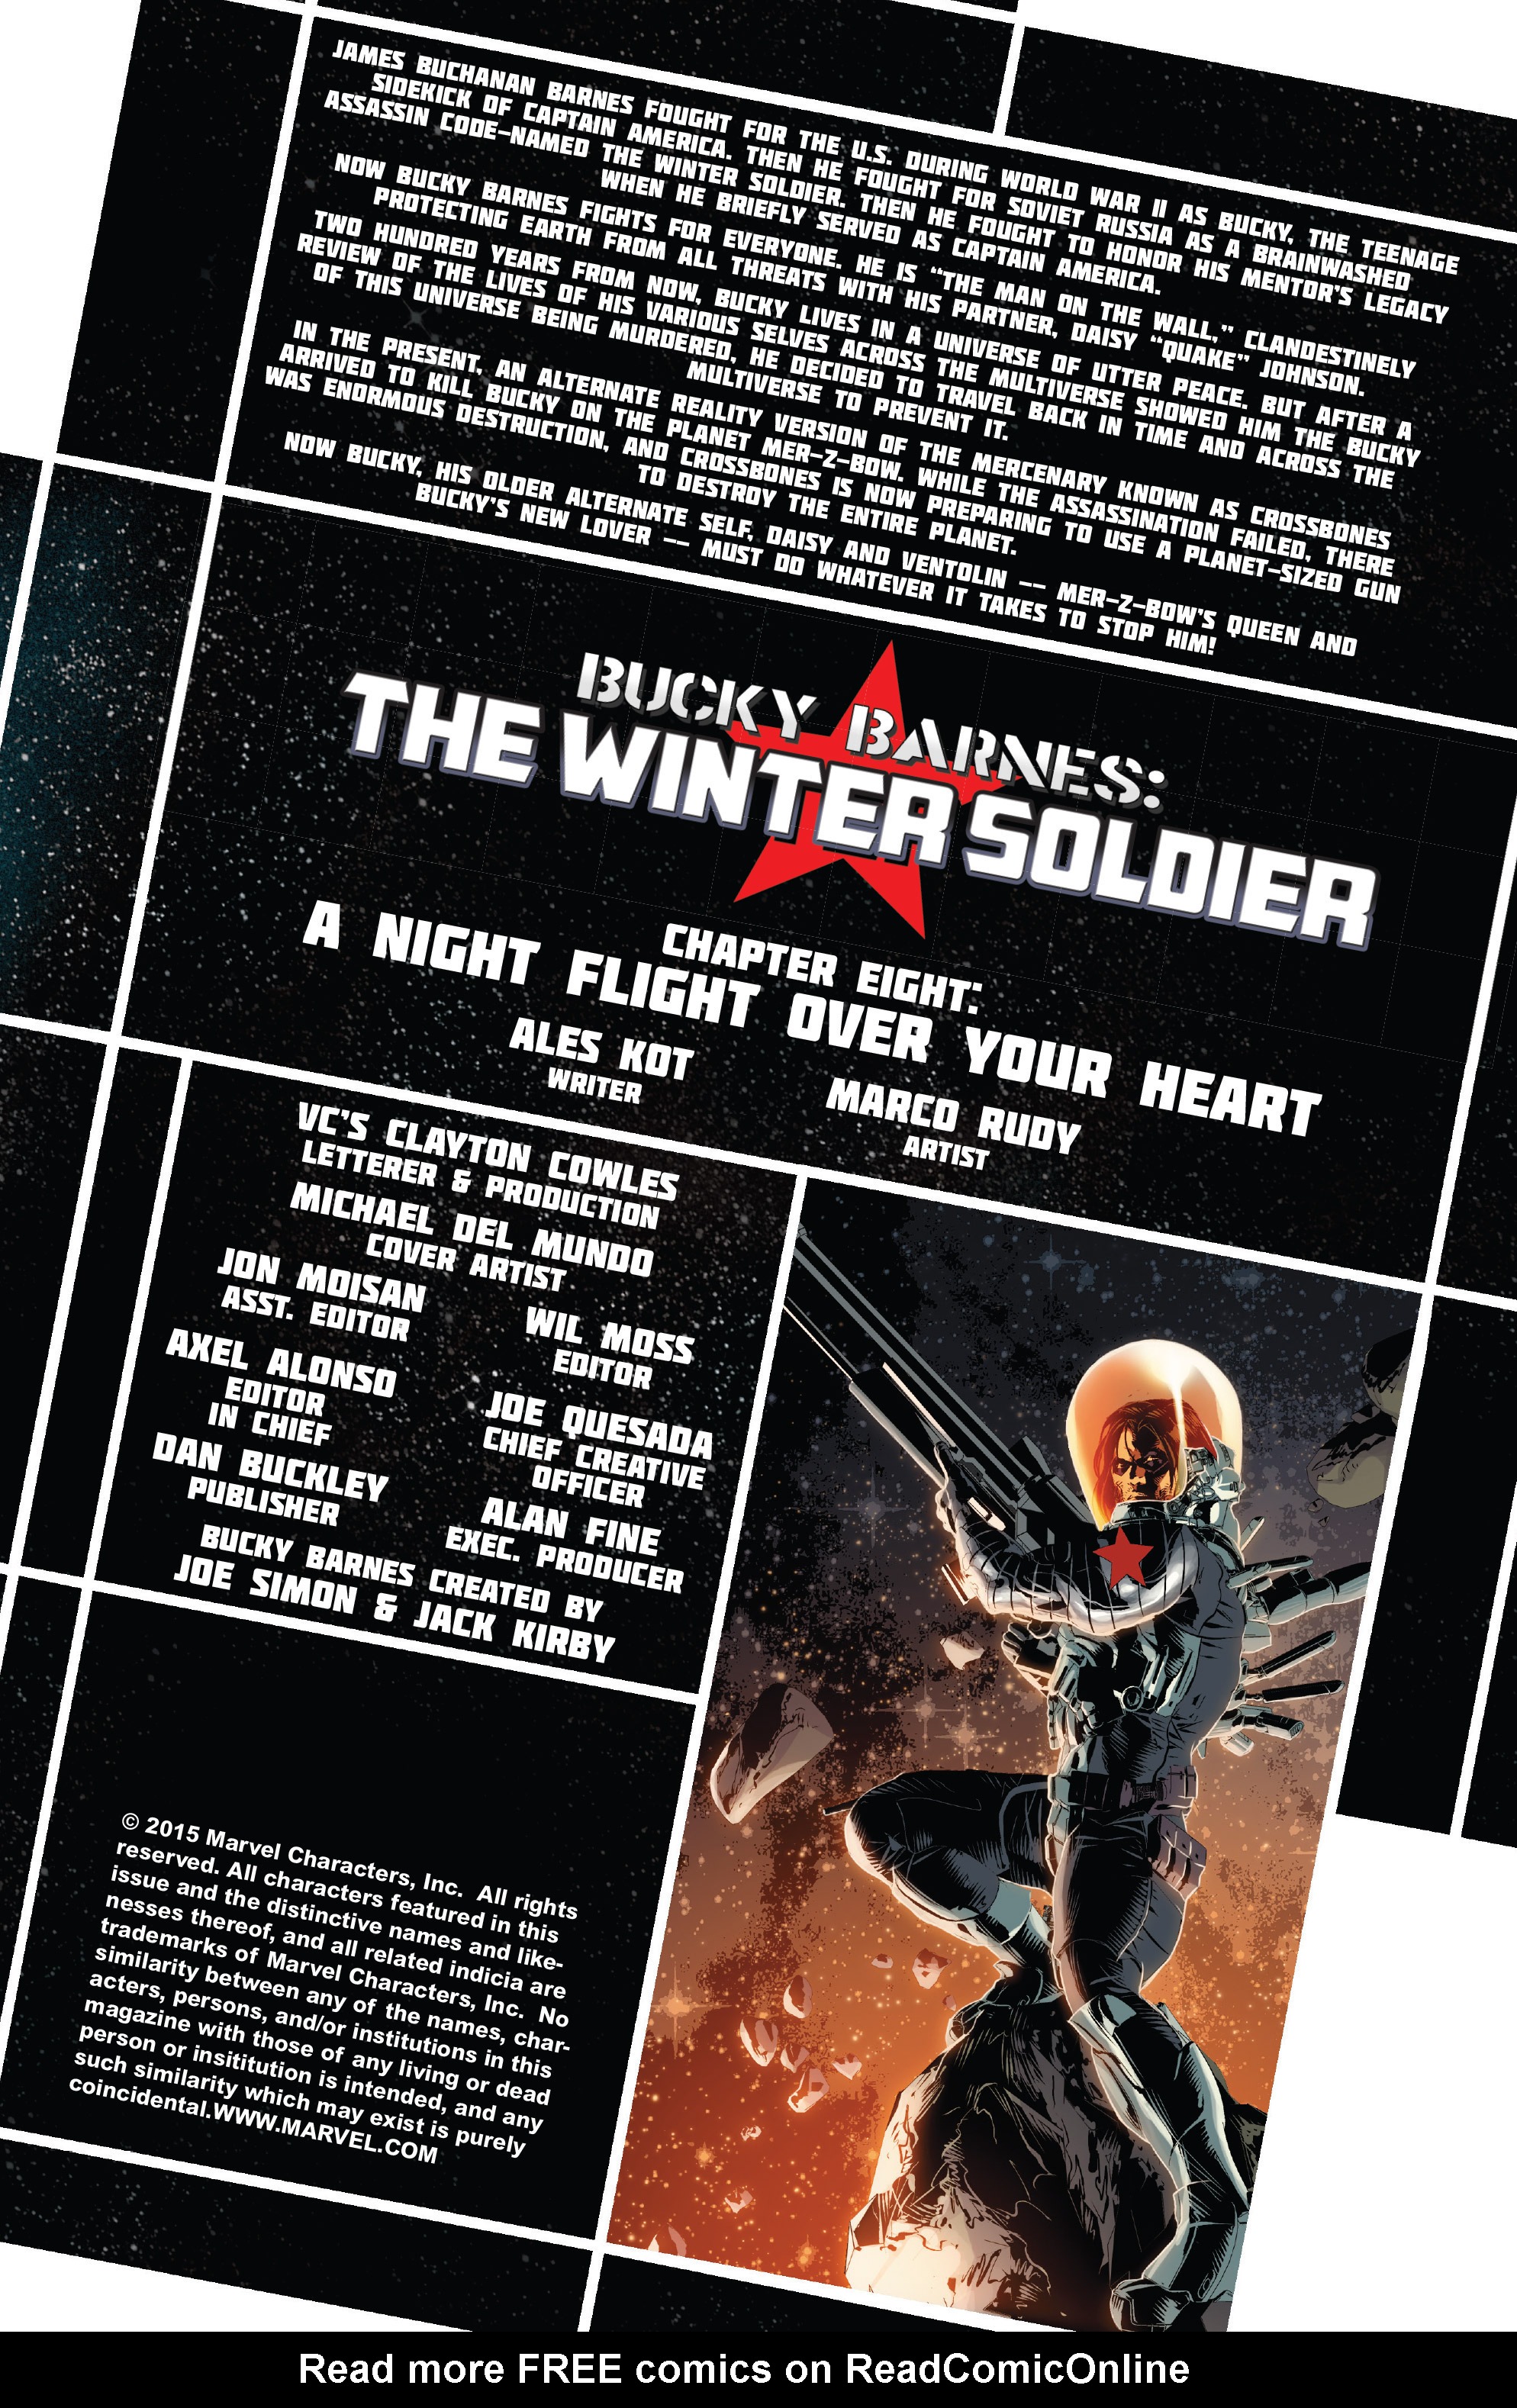 Read online Bucky Barnes: The Winter Soldier comic -  Issue #8 - 2